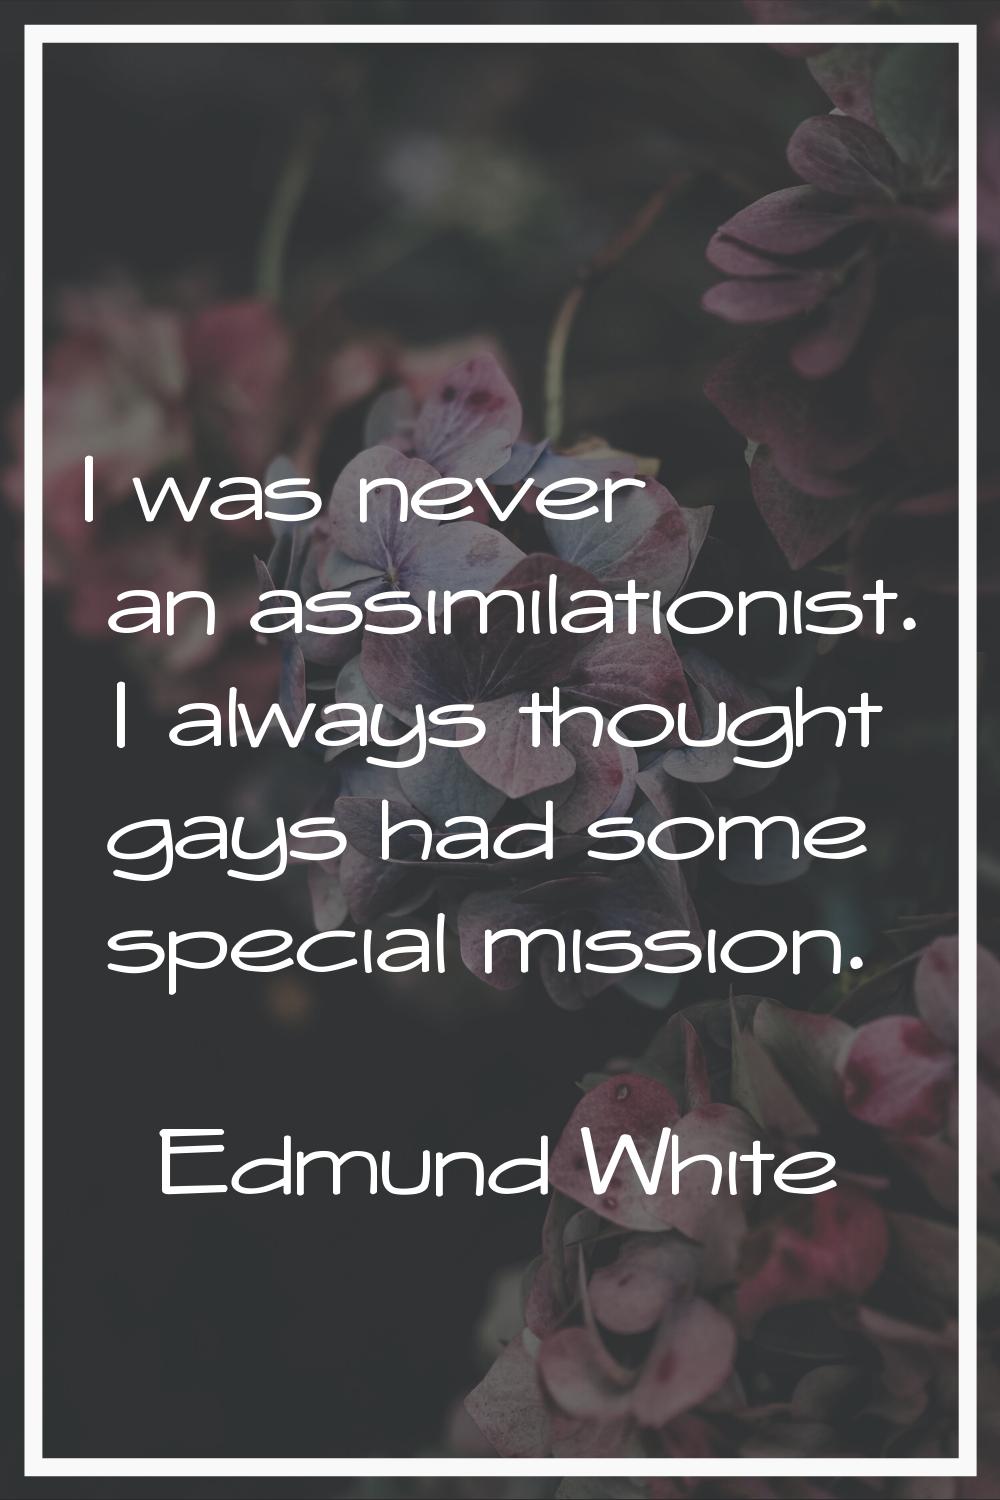 I was never an assimilationist. I always thought gays had some special mission.